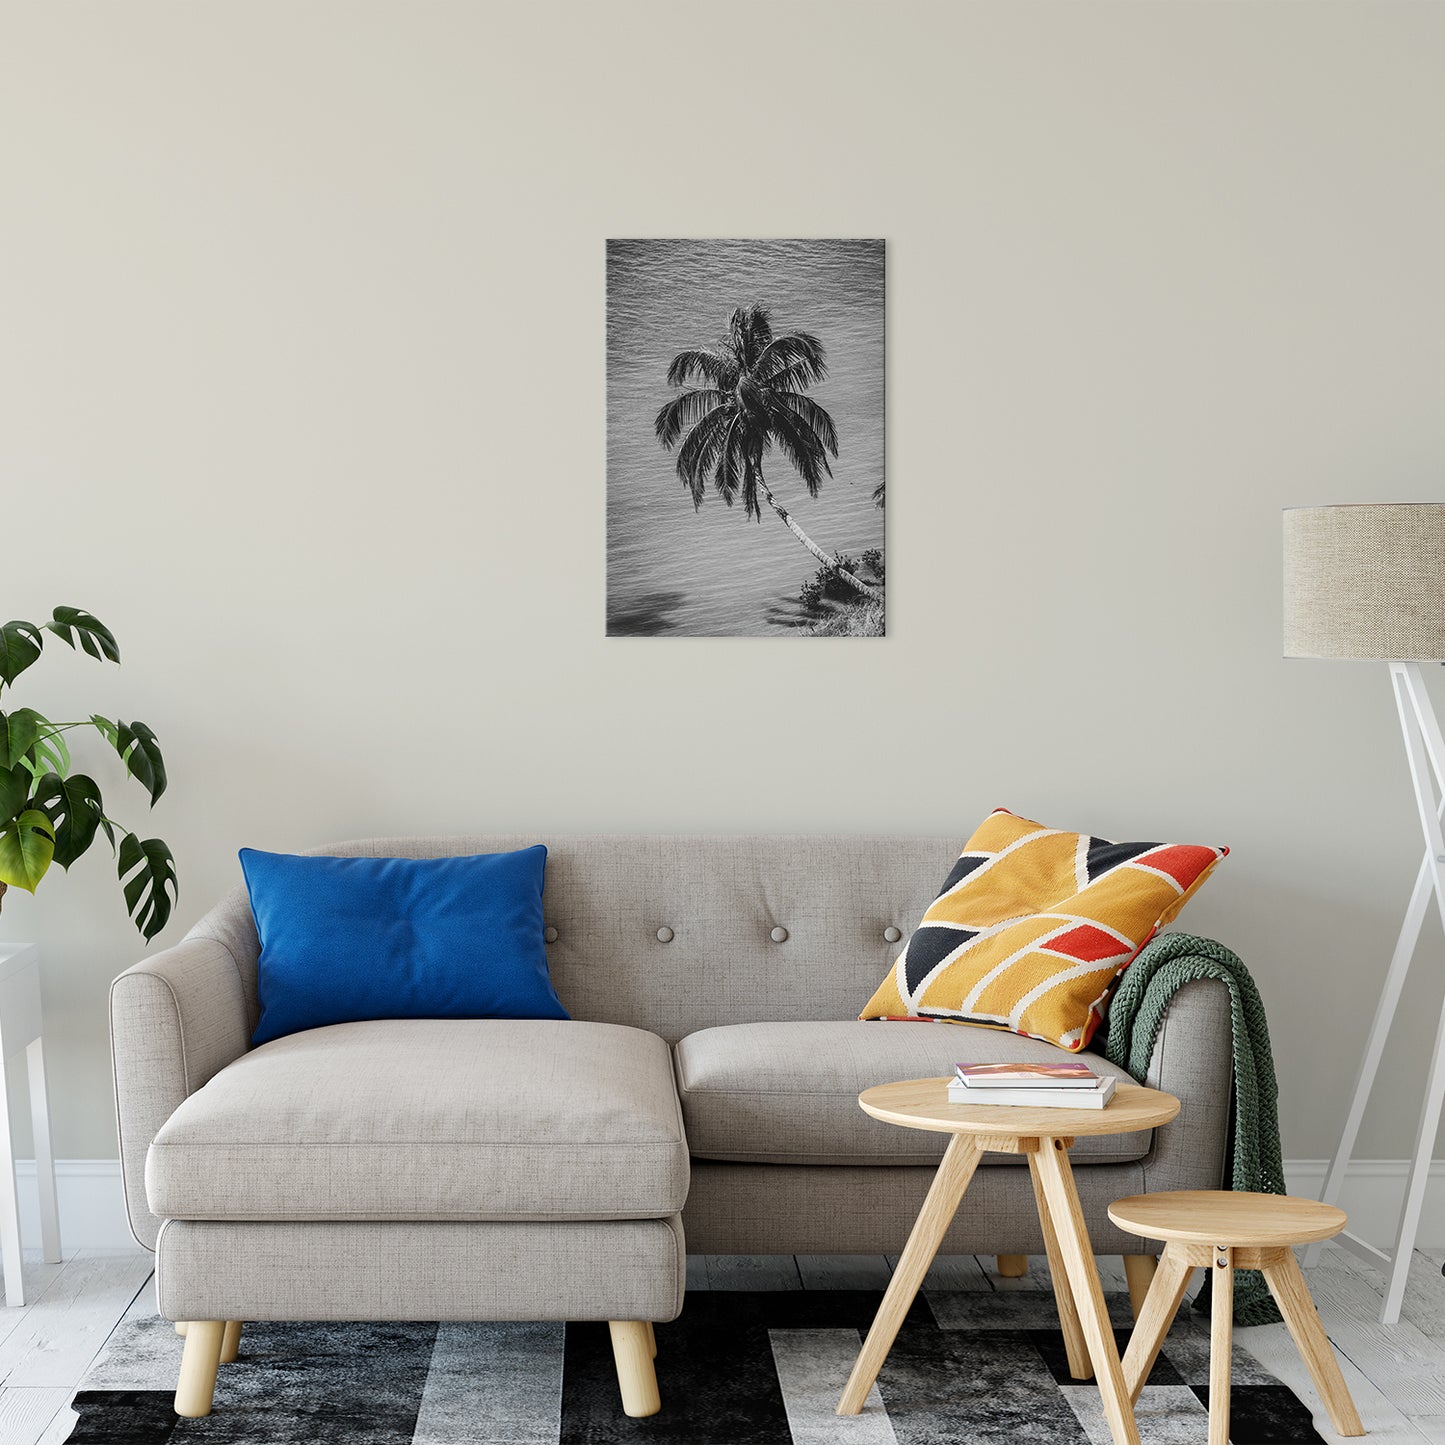 Palm Over Water Black and White Nature / Botanical Photo Fine Art Canvas Wall Art Prints 20" x 30" - PIPAFINEART